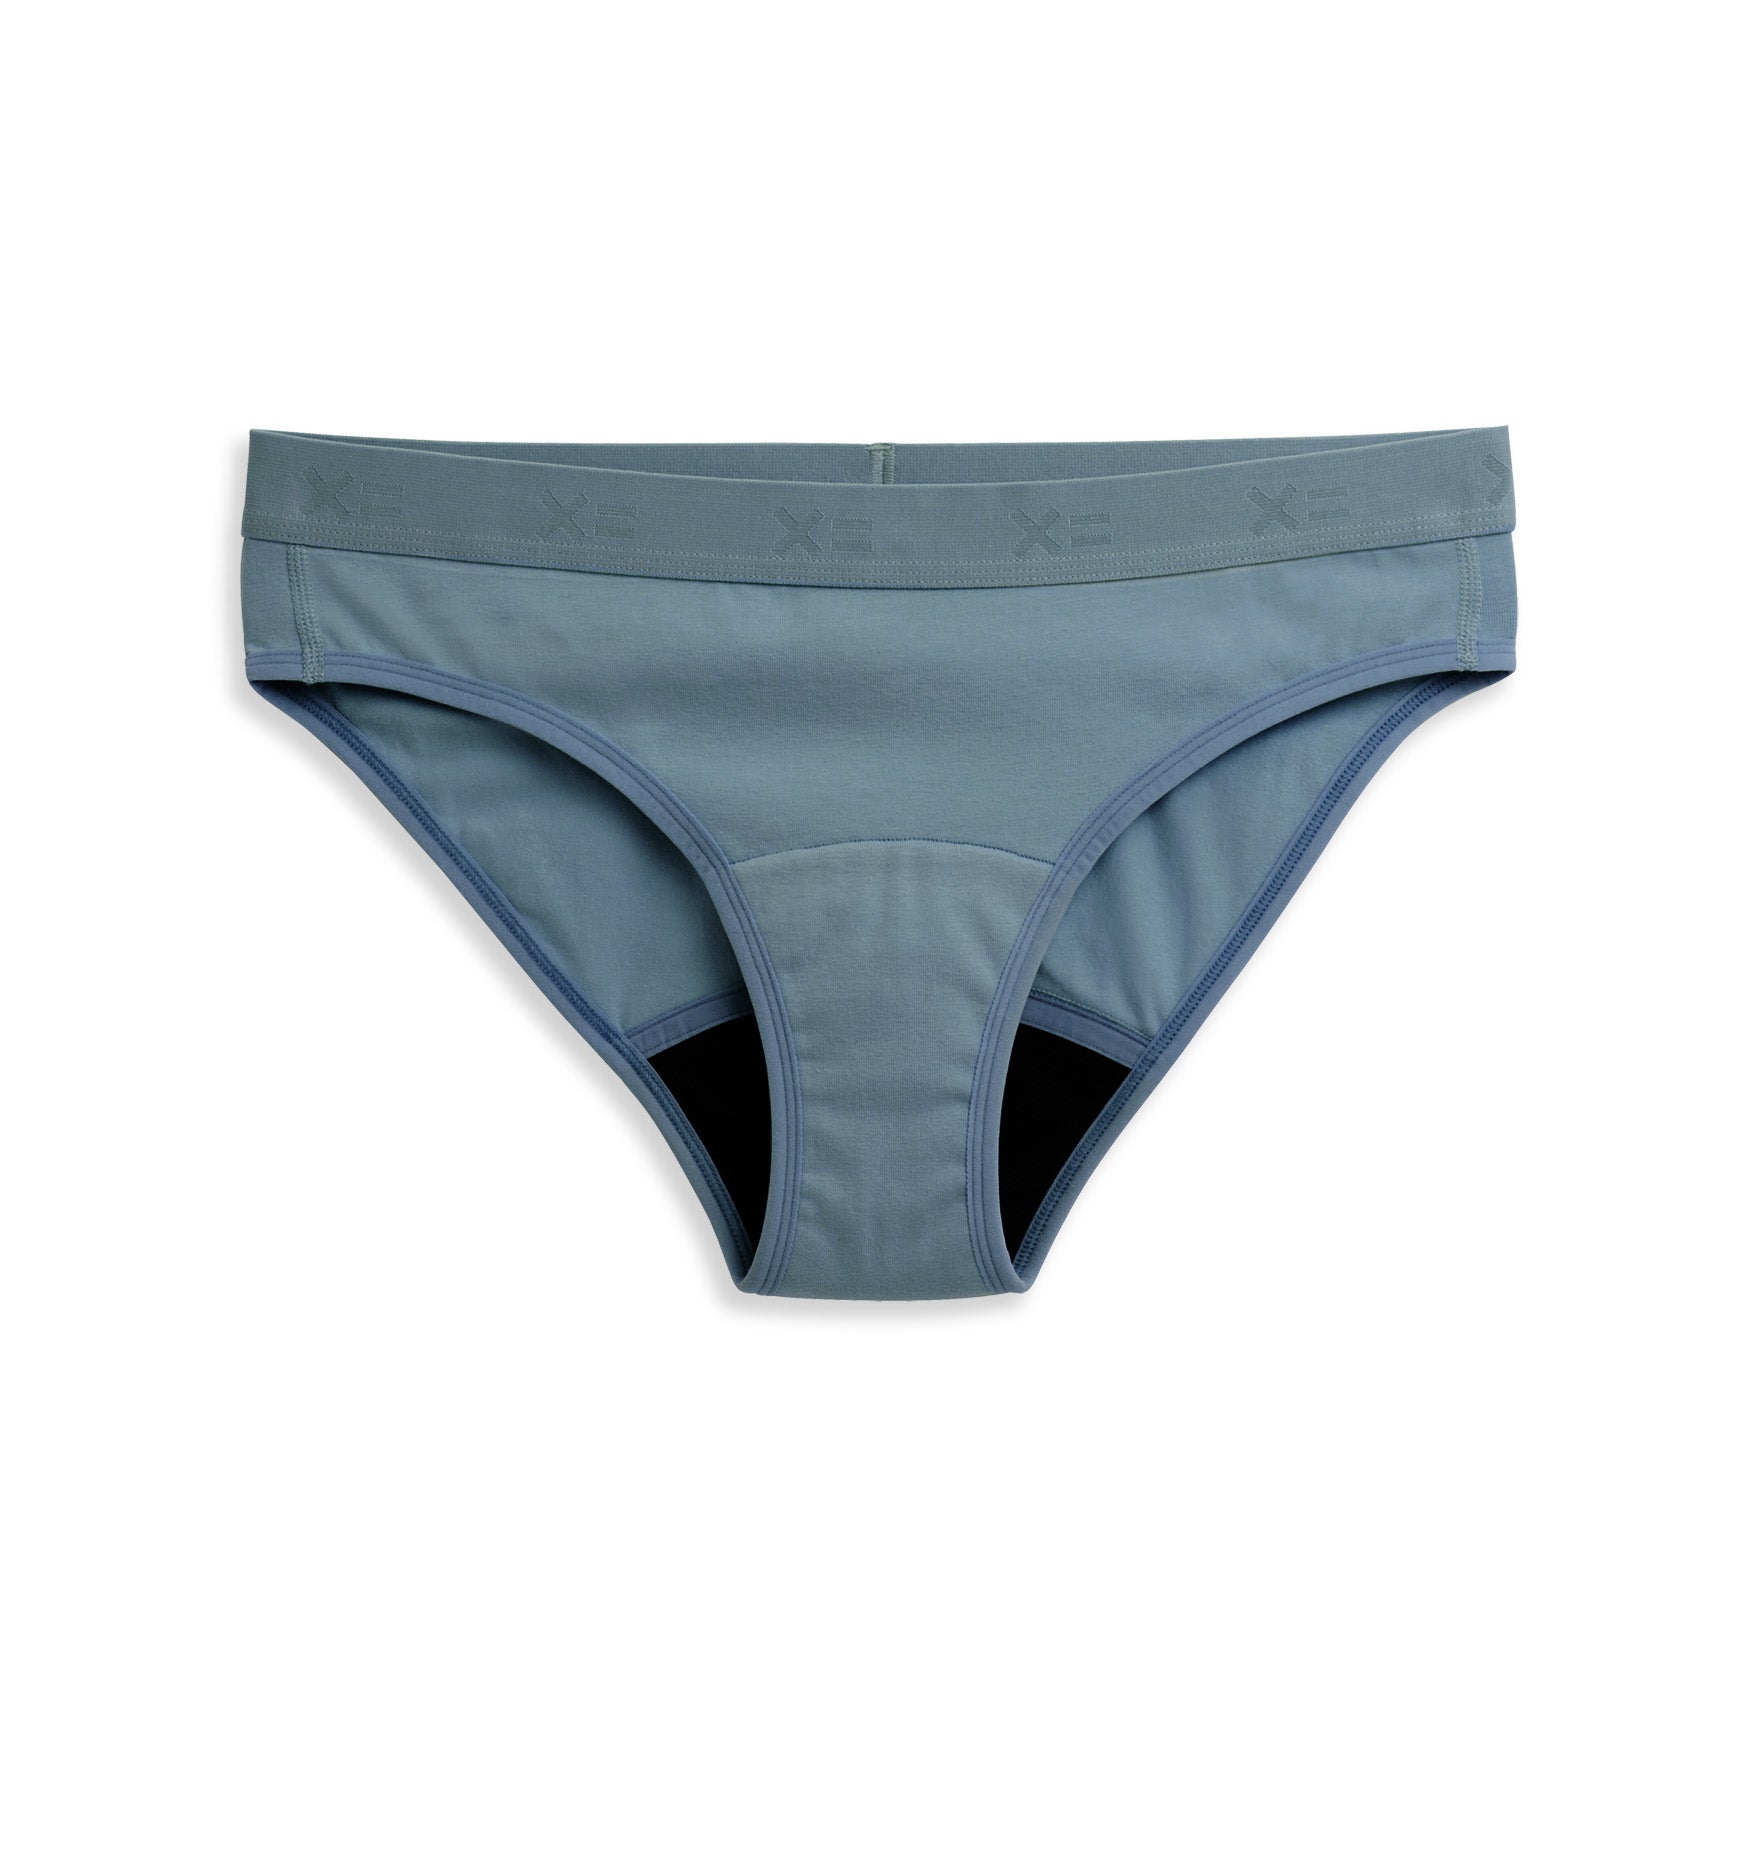 I found the perfect comfy undies that helped to ease my menopause